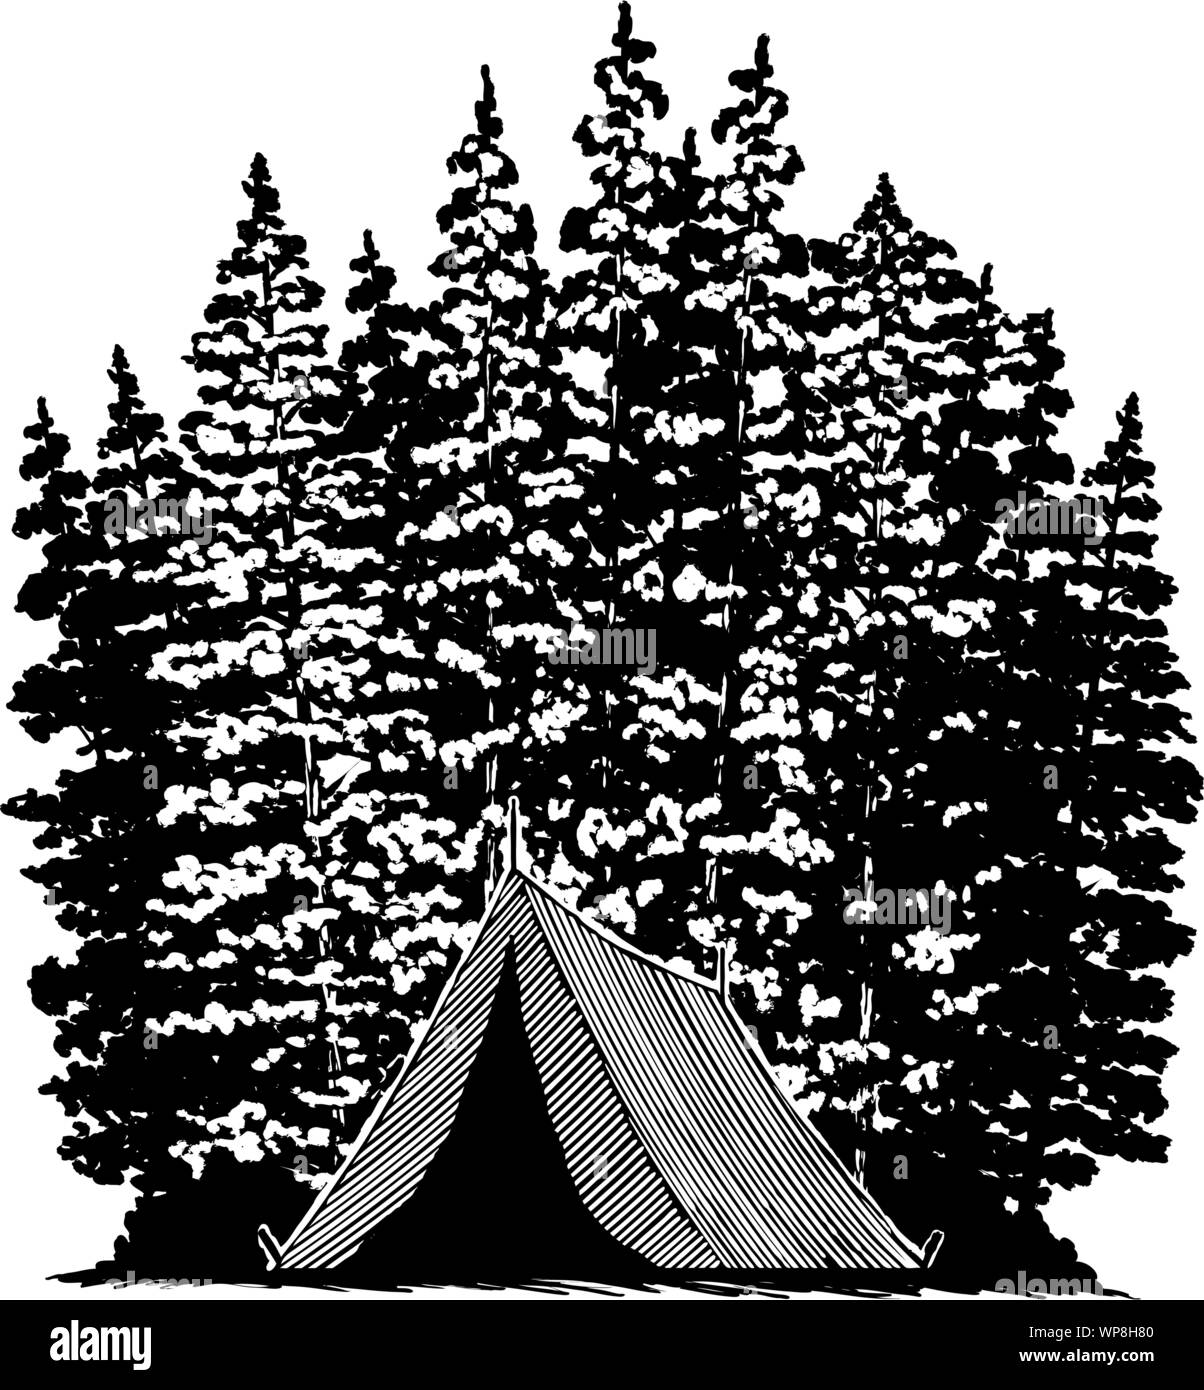 Woodcut-style illustration of a tent with trees in the background. Stock Vector